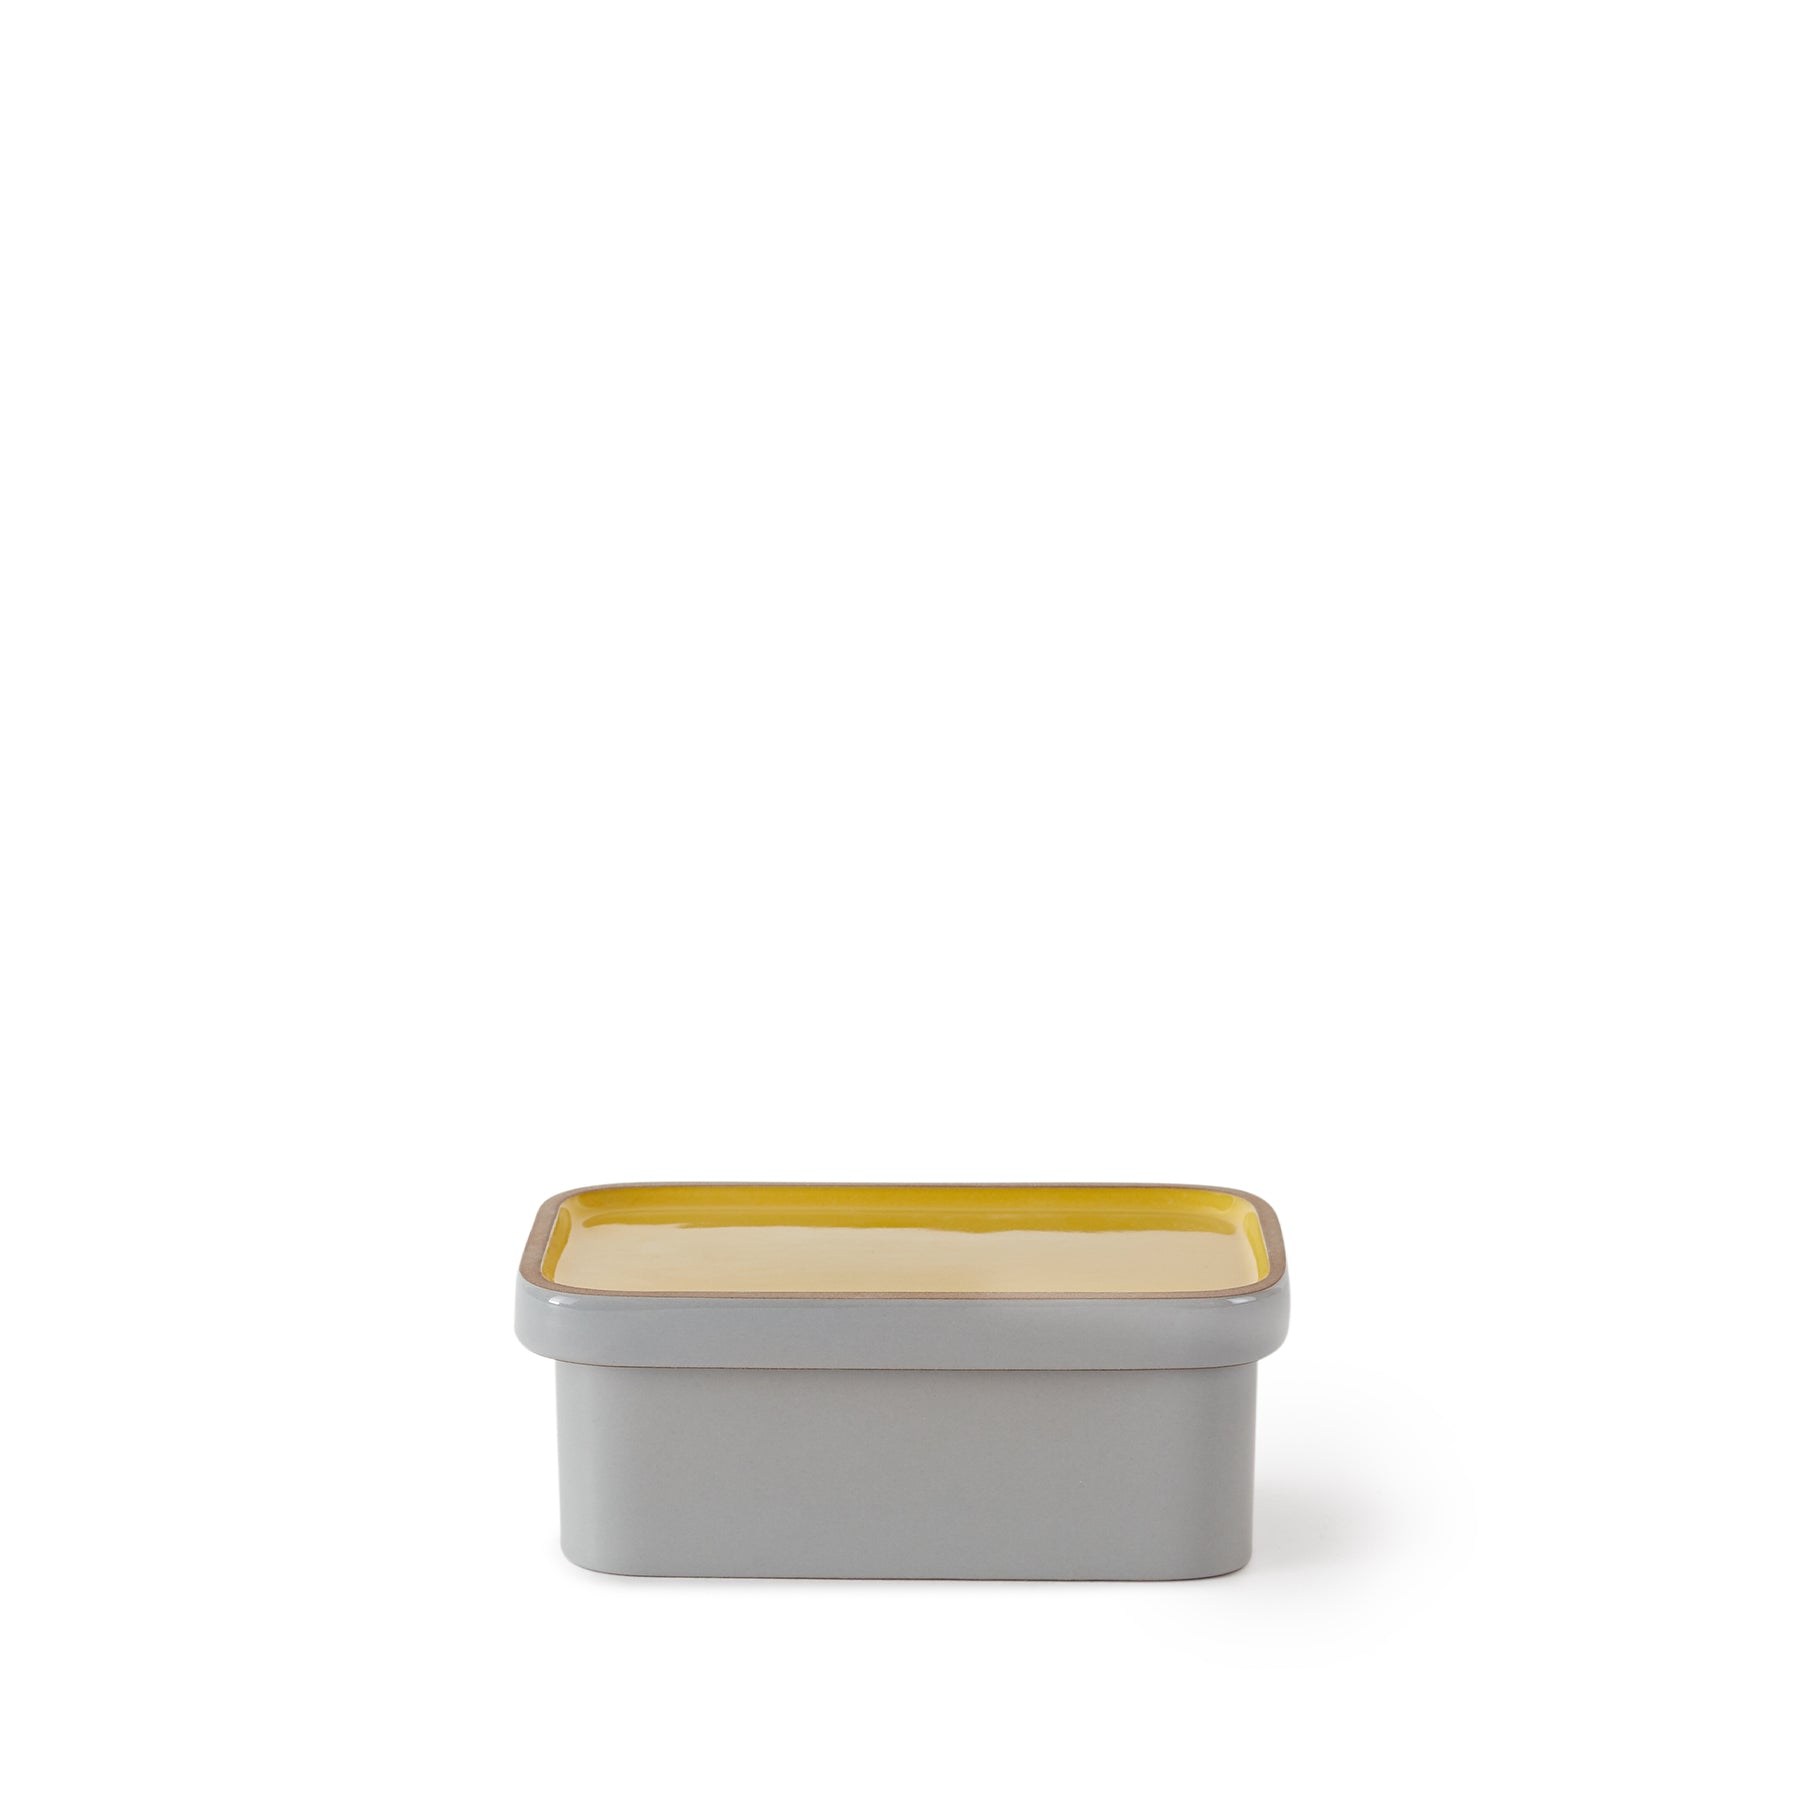 Butter Dish in Yuzu and Light Grey Whale Zoom Image 1